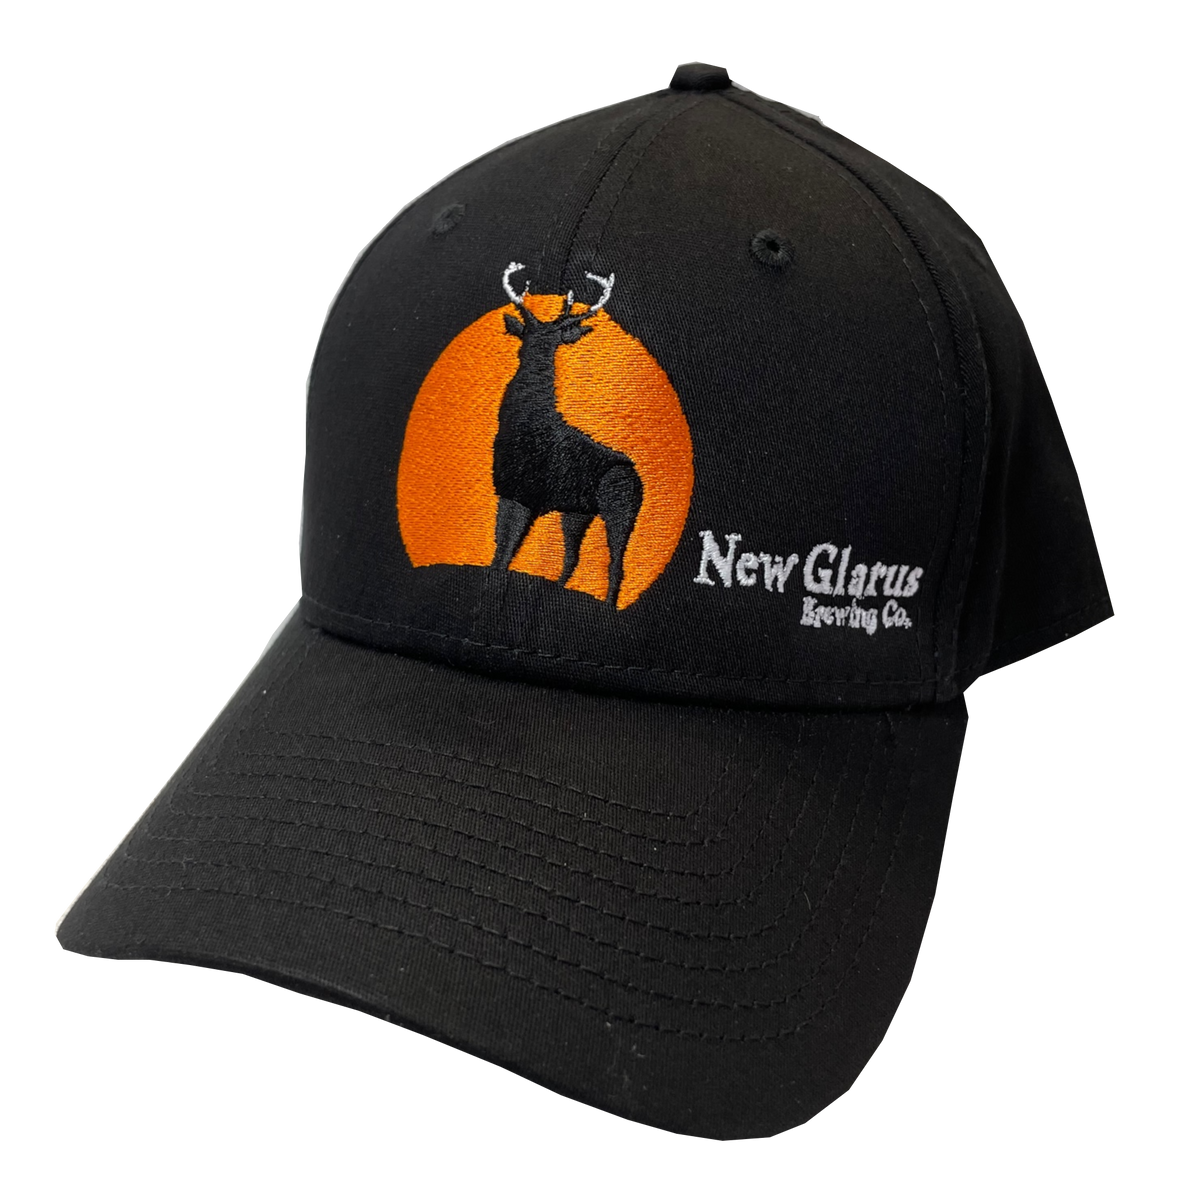 Black hat with orange and black Staghorn logo and New Glarus Brewing Co. in white.